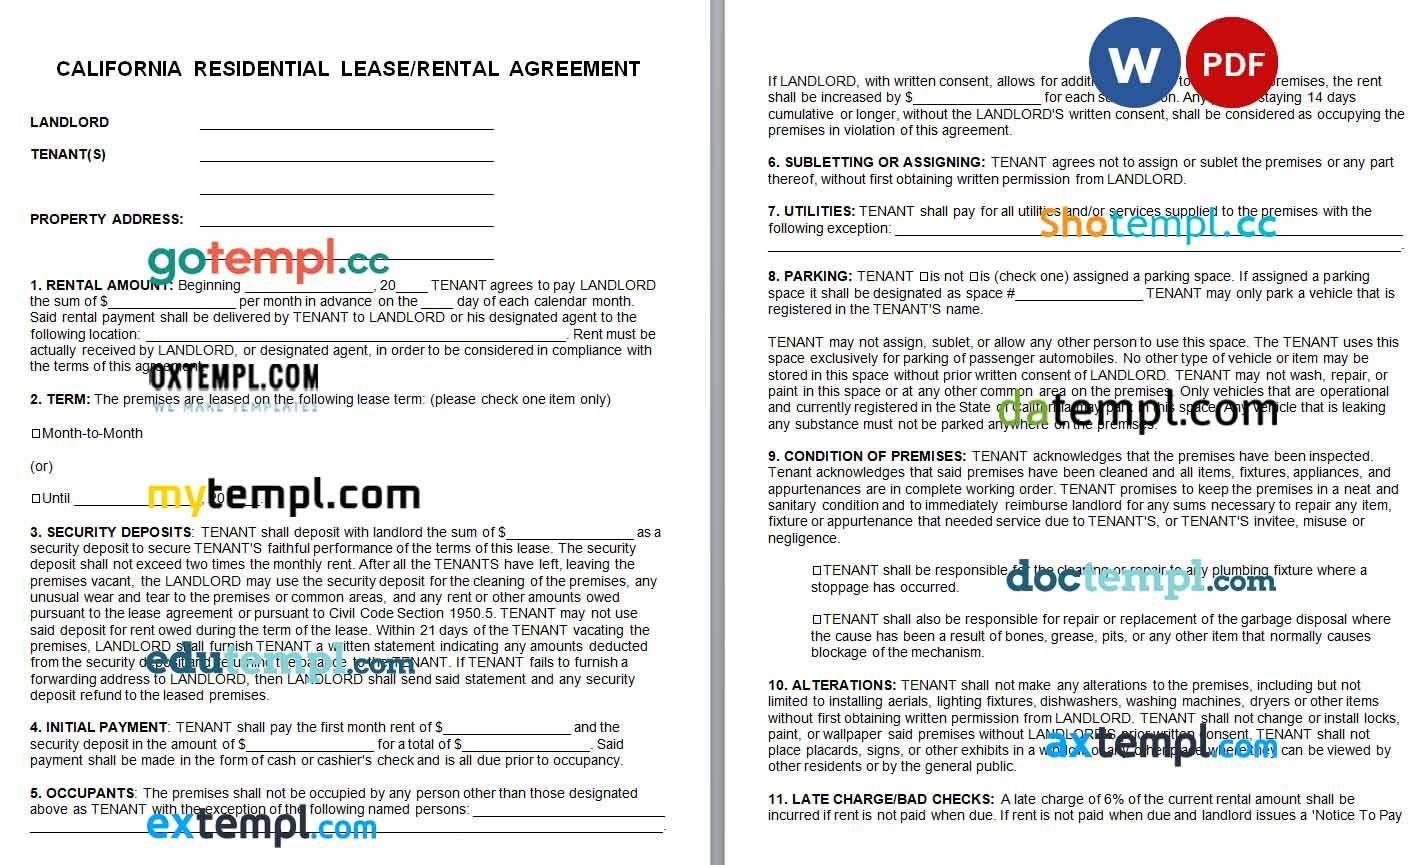 California Standard Residential Lease Agreement Word example, fully editable